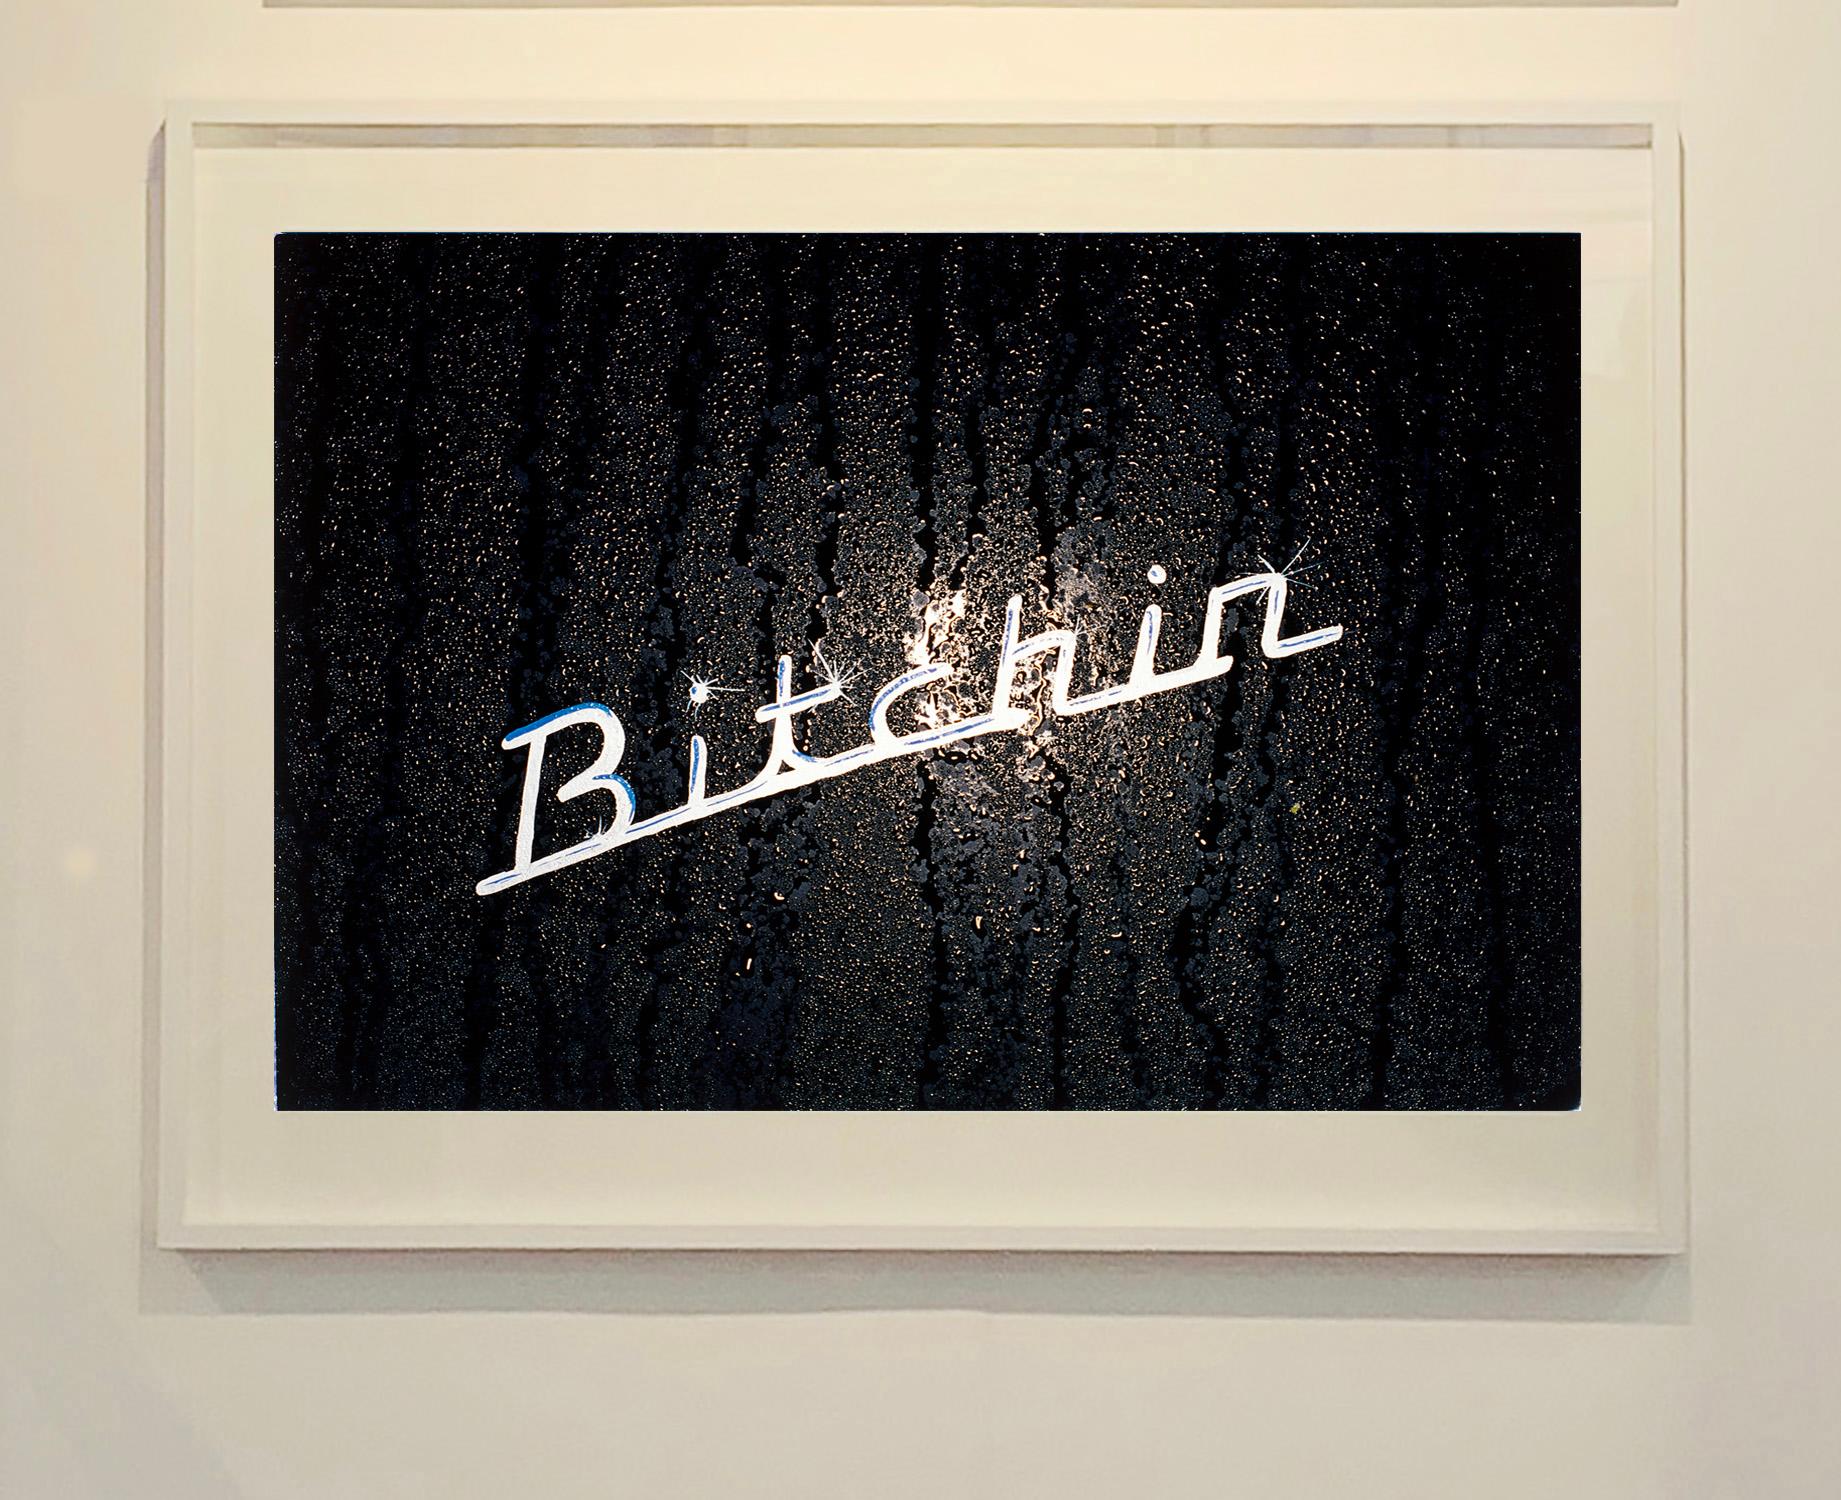 'Bitchin', bold monochrome typographic photograph from Richard Heeps 'Man's Ruin' series, taken at the Hemsby Rock 'n' Roll Weekender.

This artwork is a limited edition of 25 gloss photographic print, accompanied by a signed and numbered